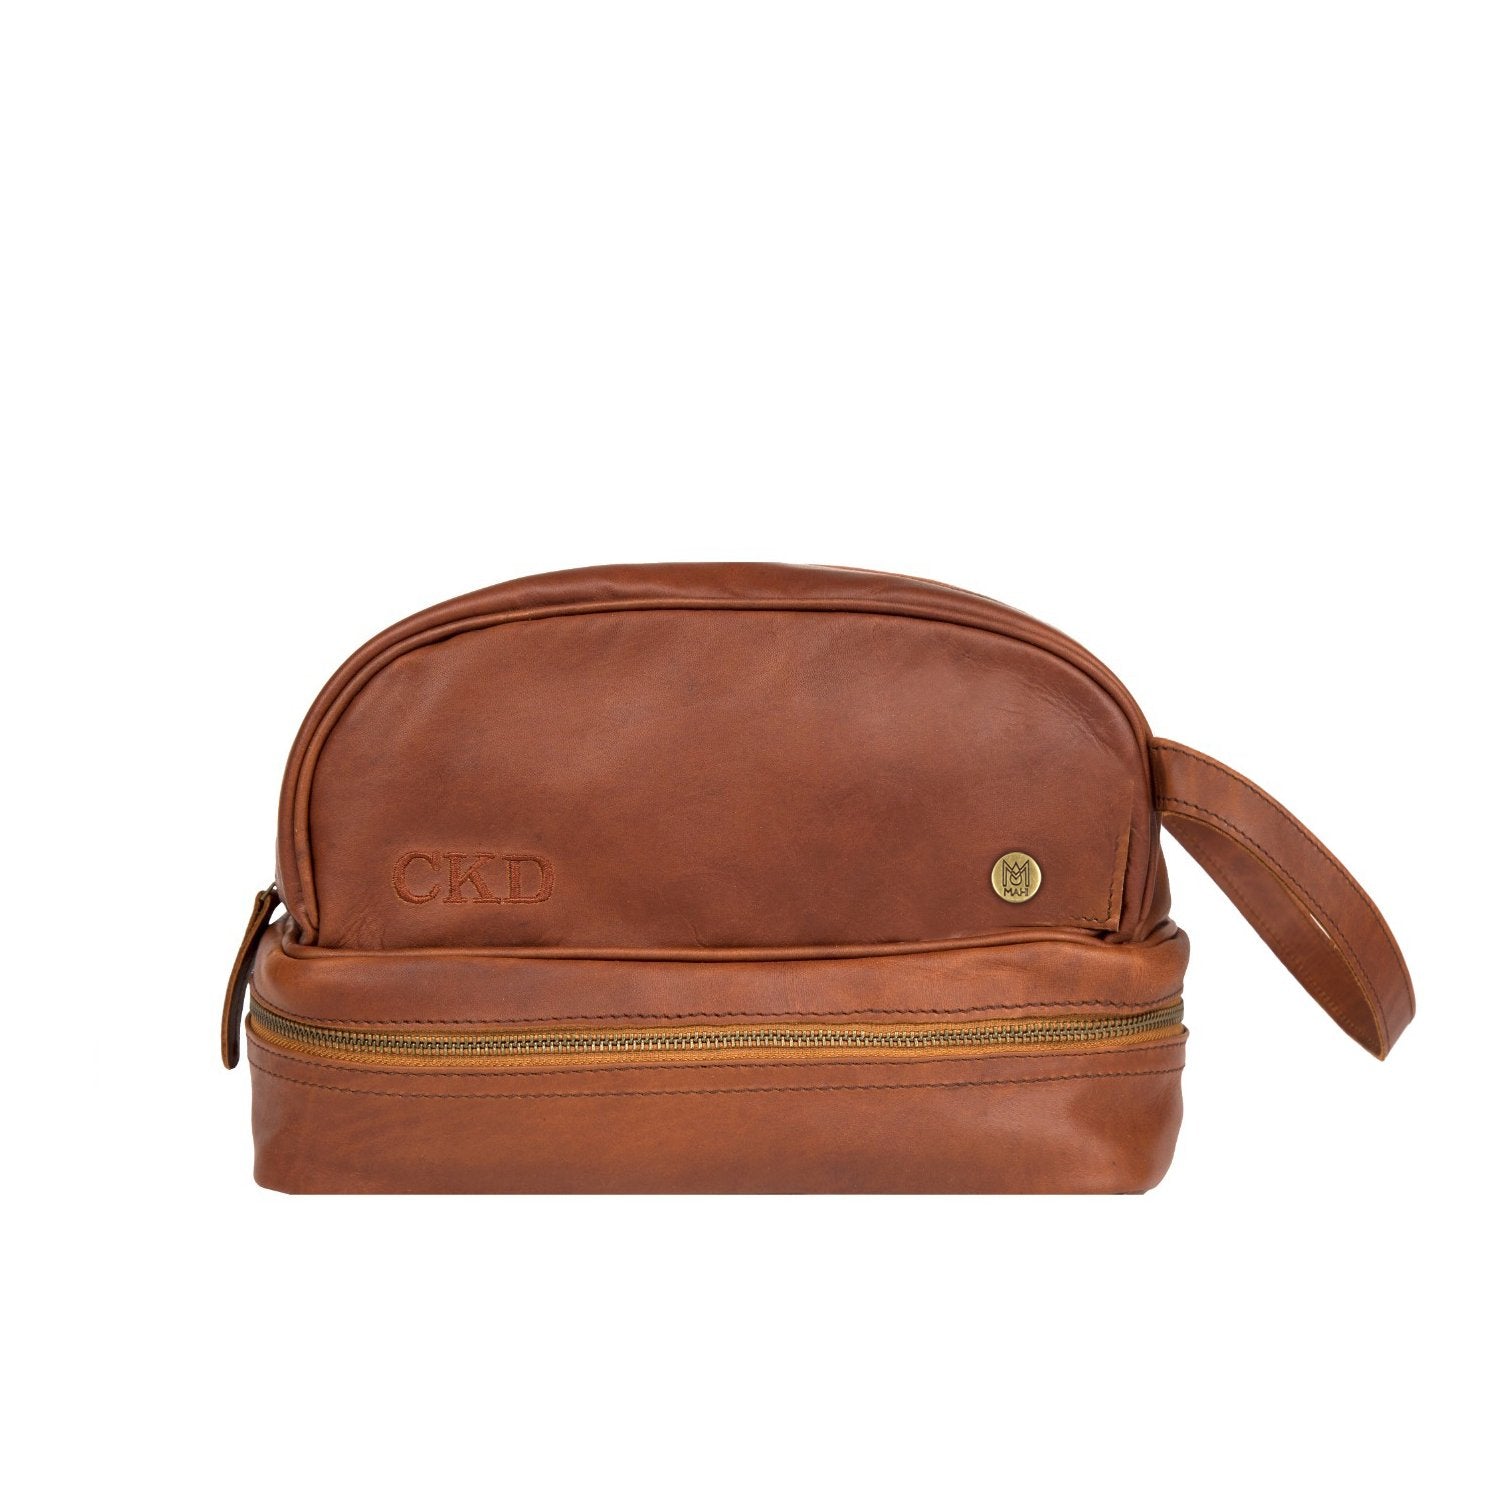 Personalized Brown Leather Wash Bag- Travel Accessories for Him